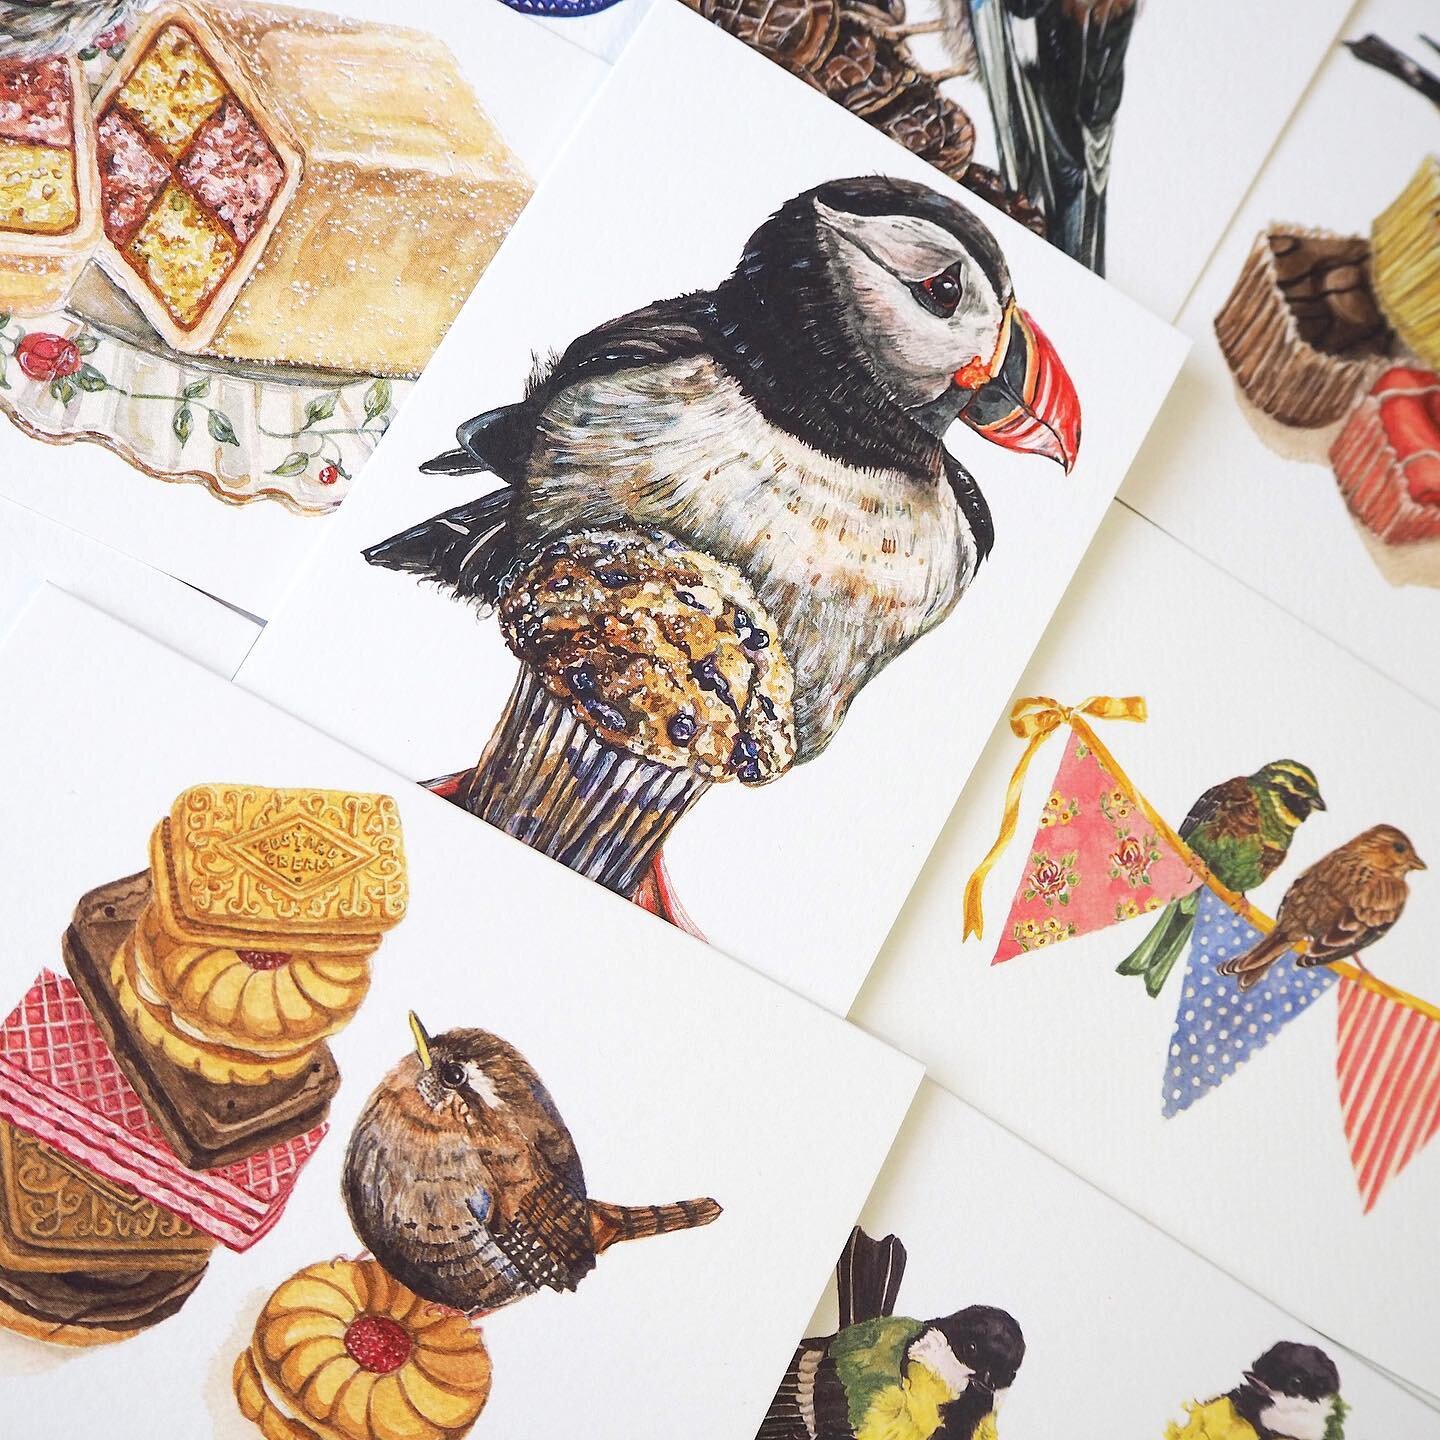 So many card orders going out at the moment! Thank you so much if you&rsquo;ve supported my little shop! Delivery is still free on orders over &pound;10, plus you&rsquo;ll get a free notebook too! I promise prints are coming soon too, I&rsquo;m just 